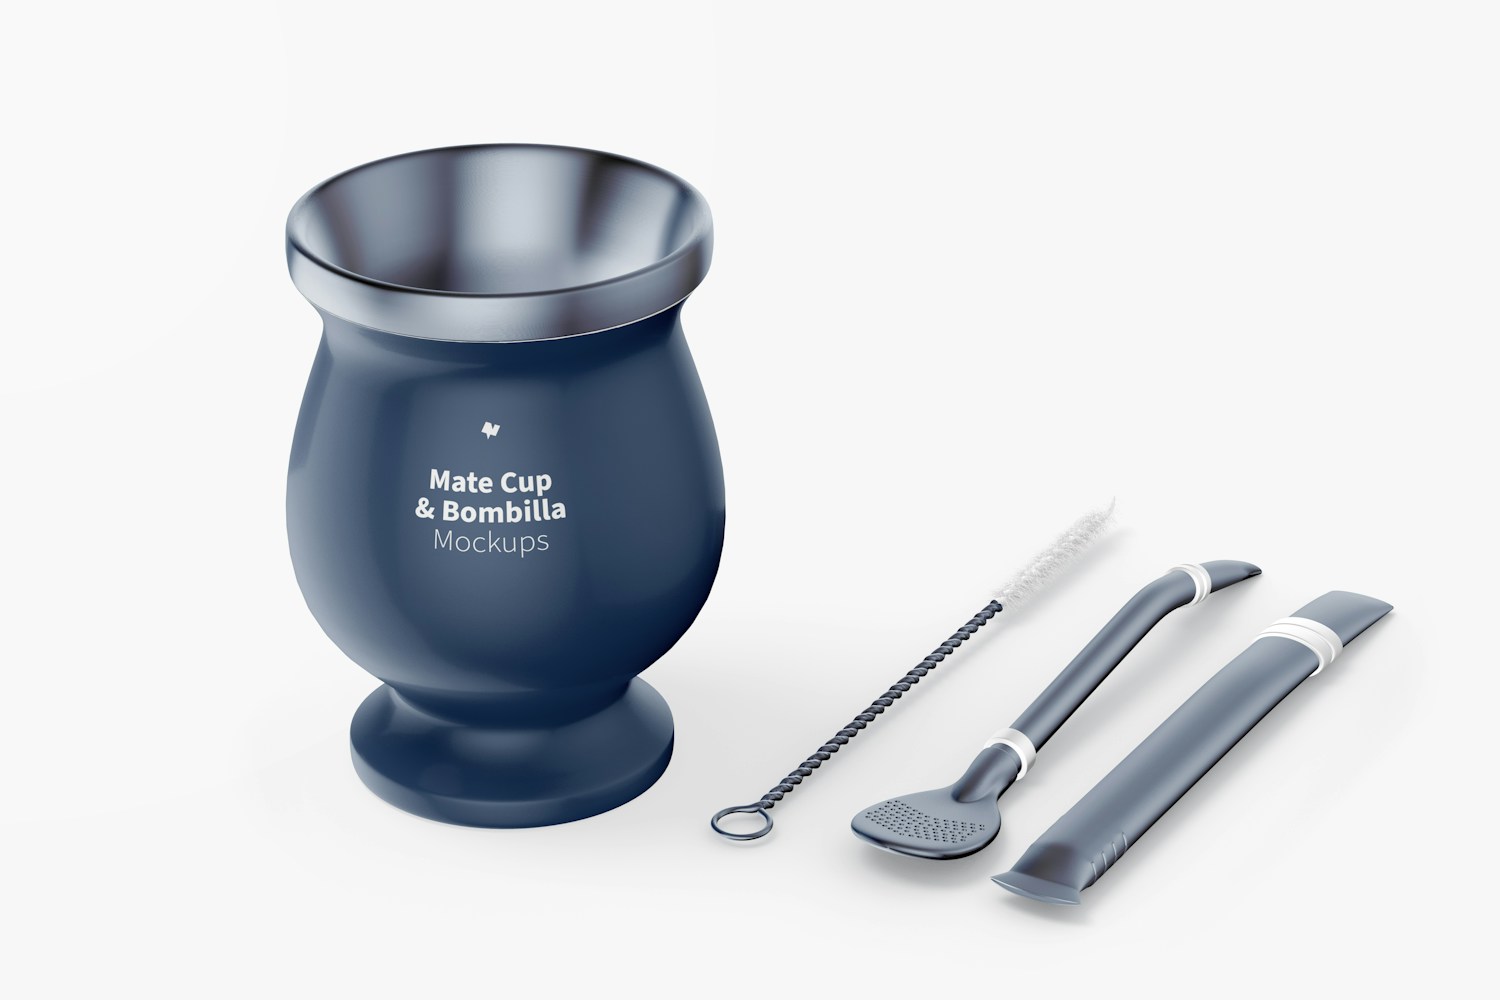 Mate Cup and Bombilla Mockup